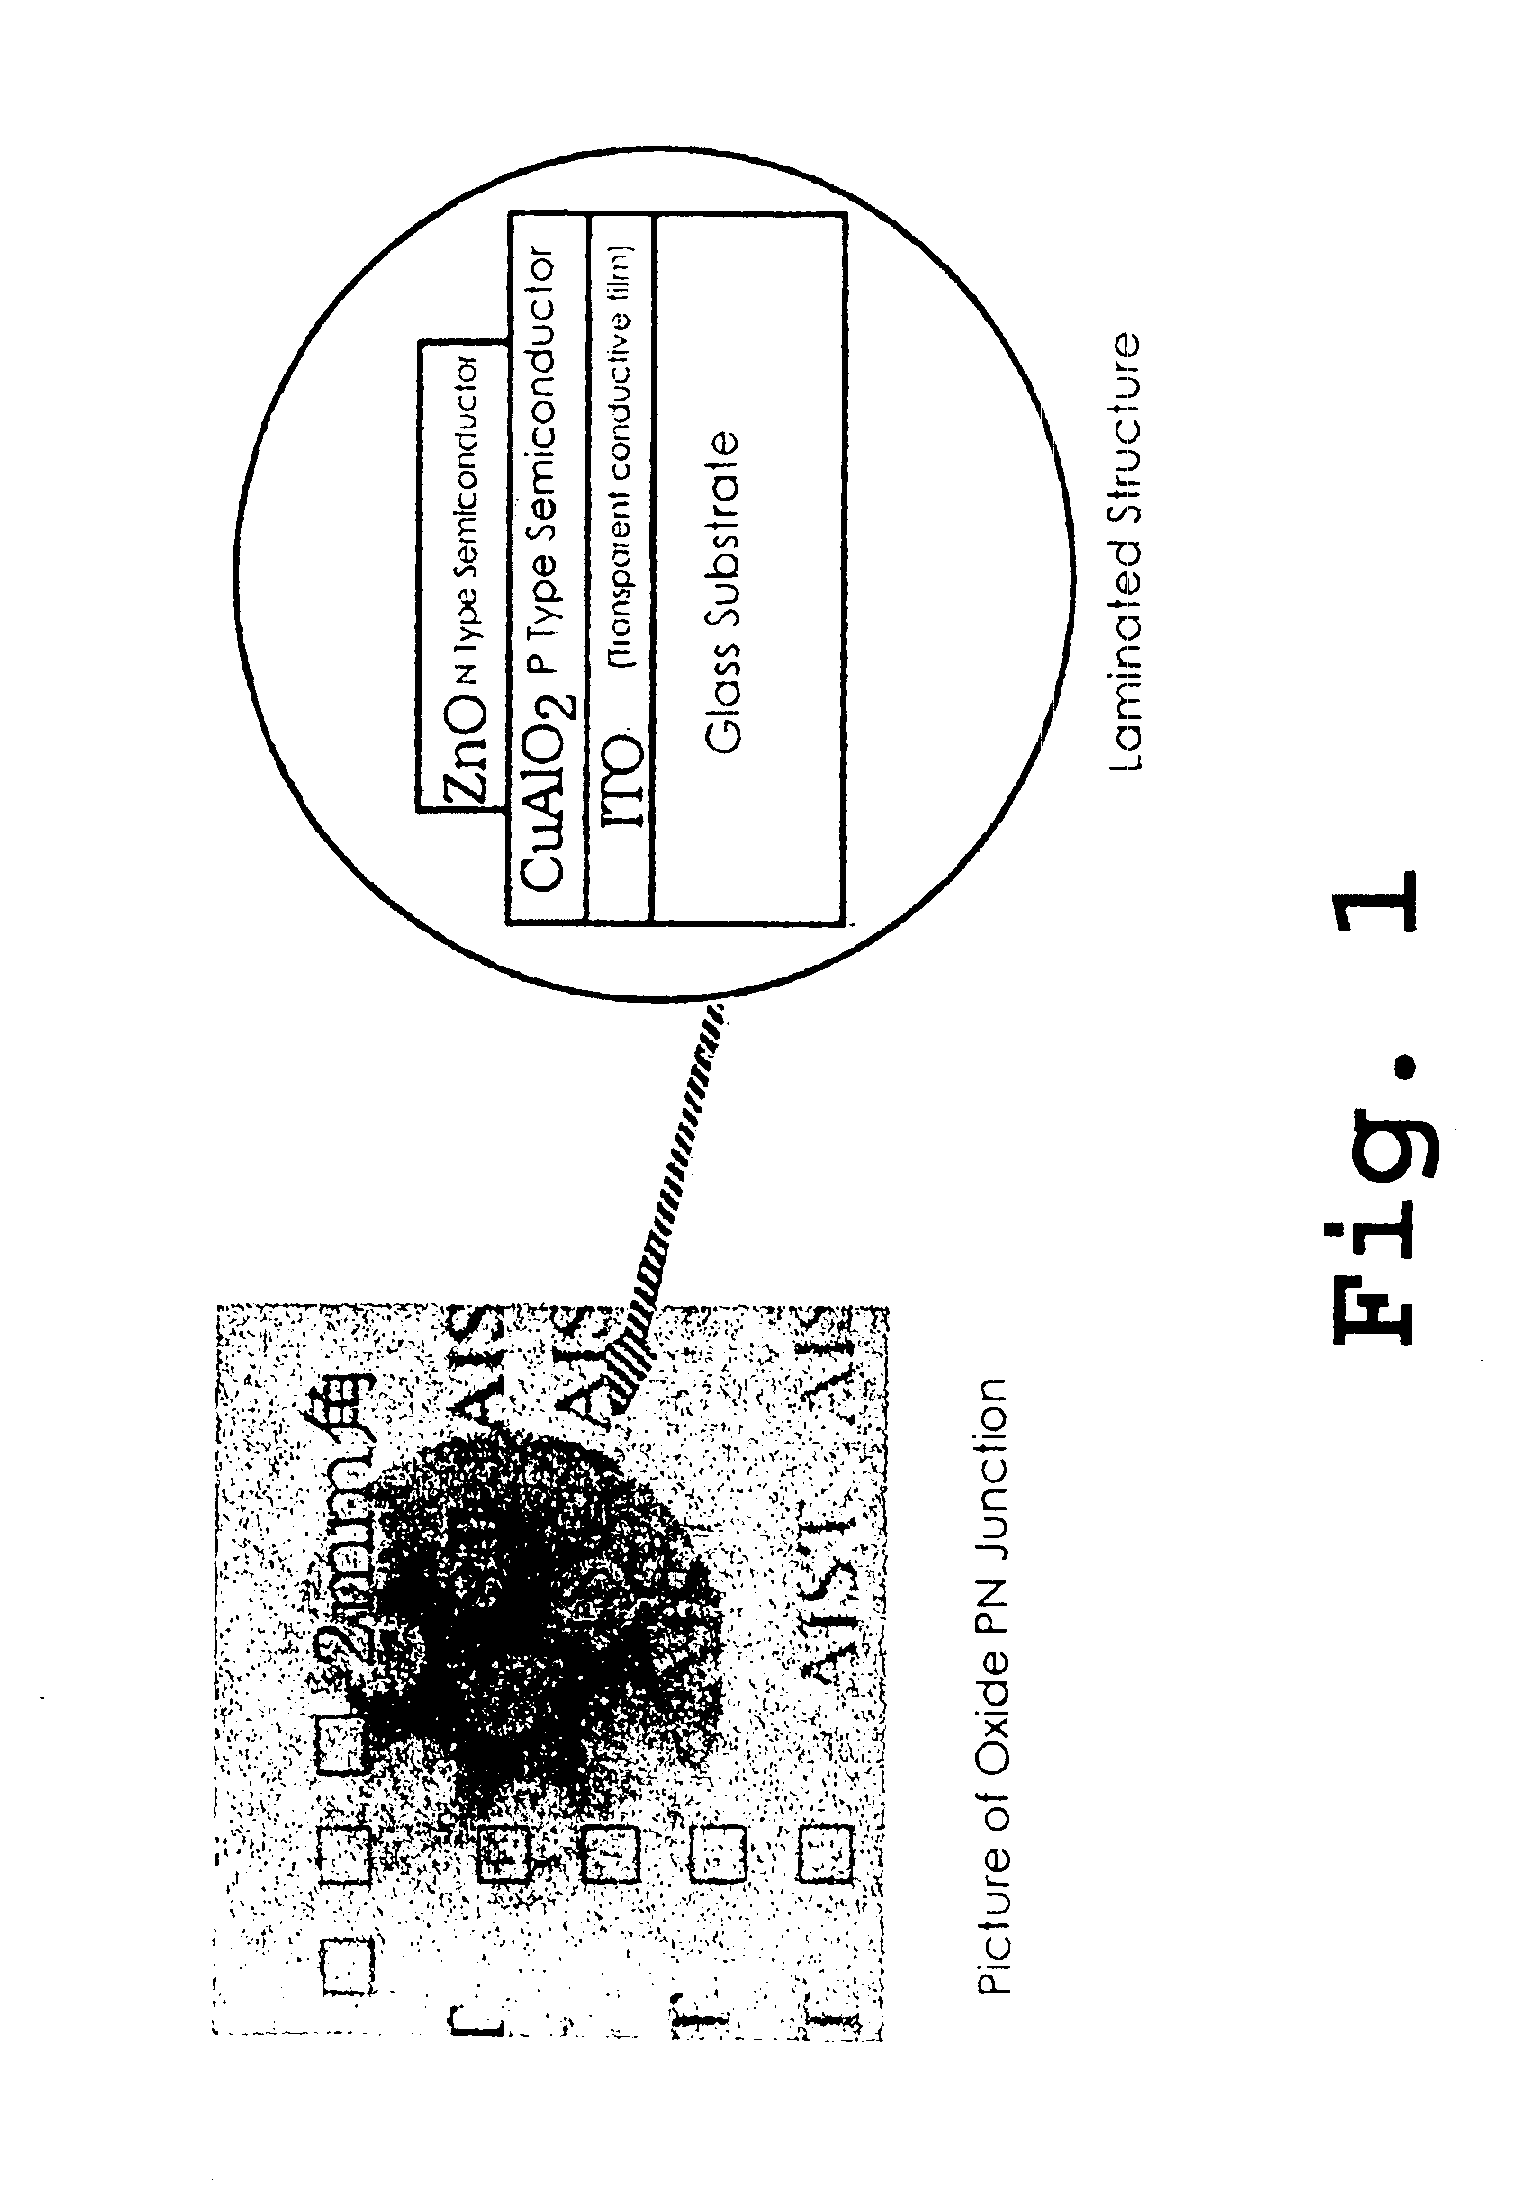 Visible light transmitting structure with photovoltaic effect